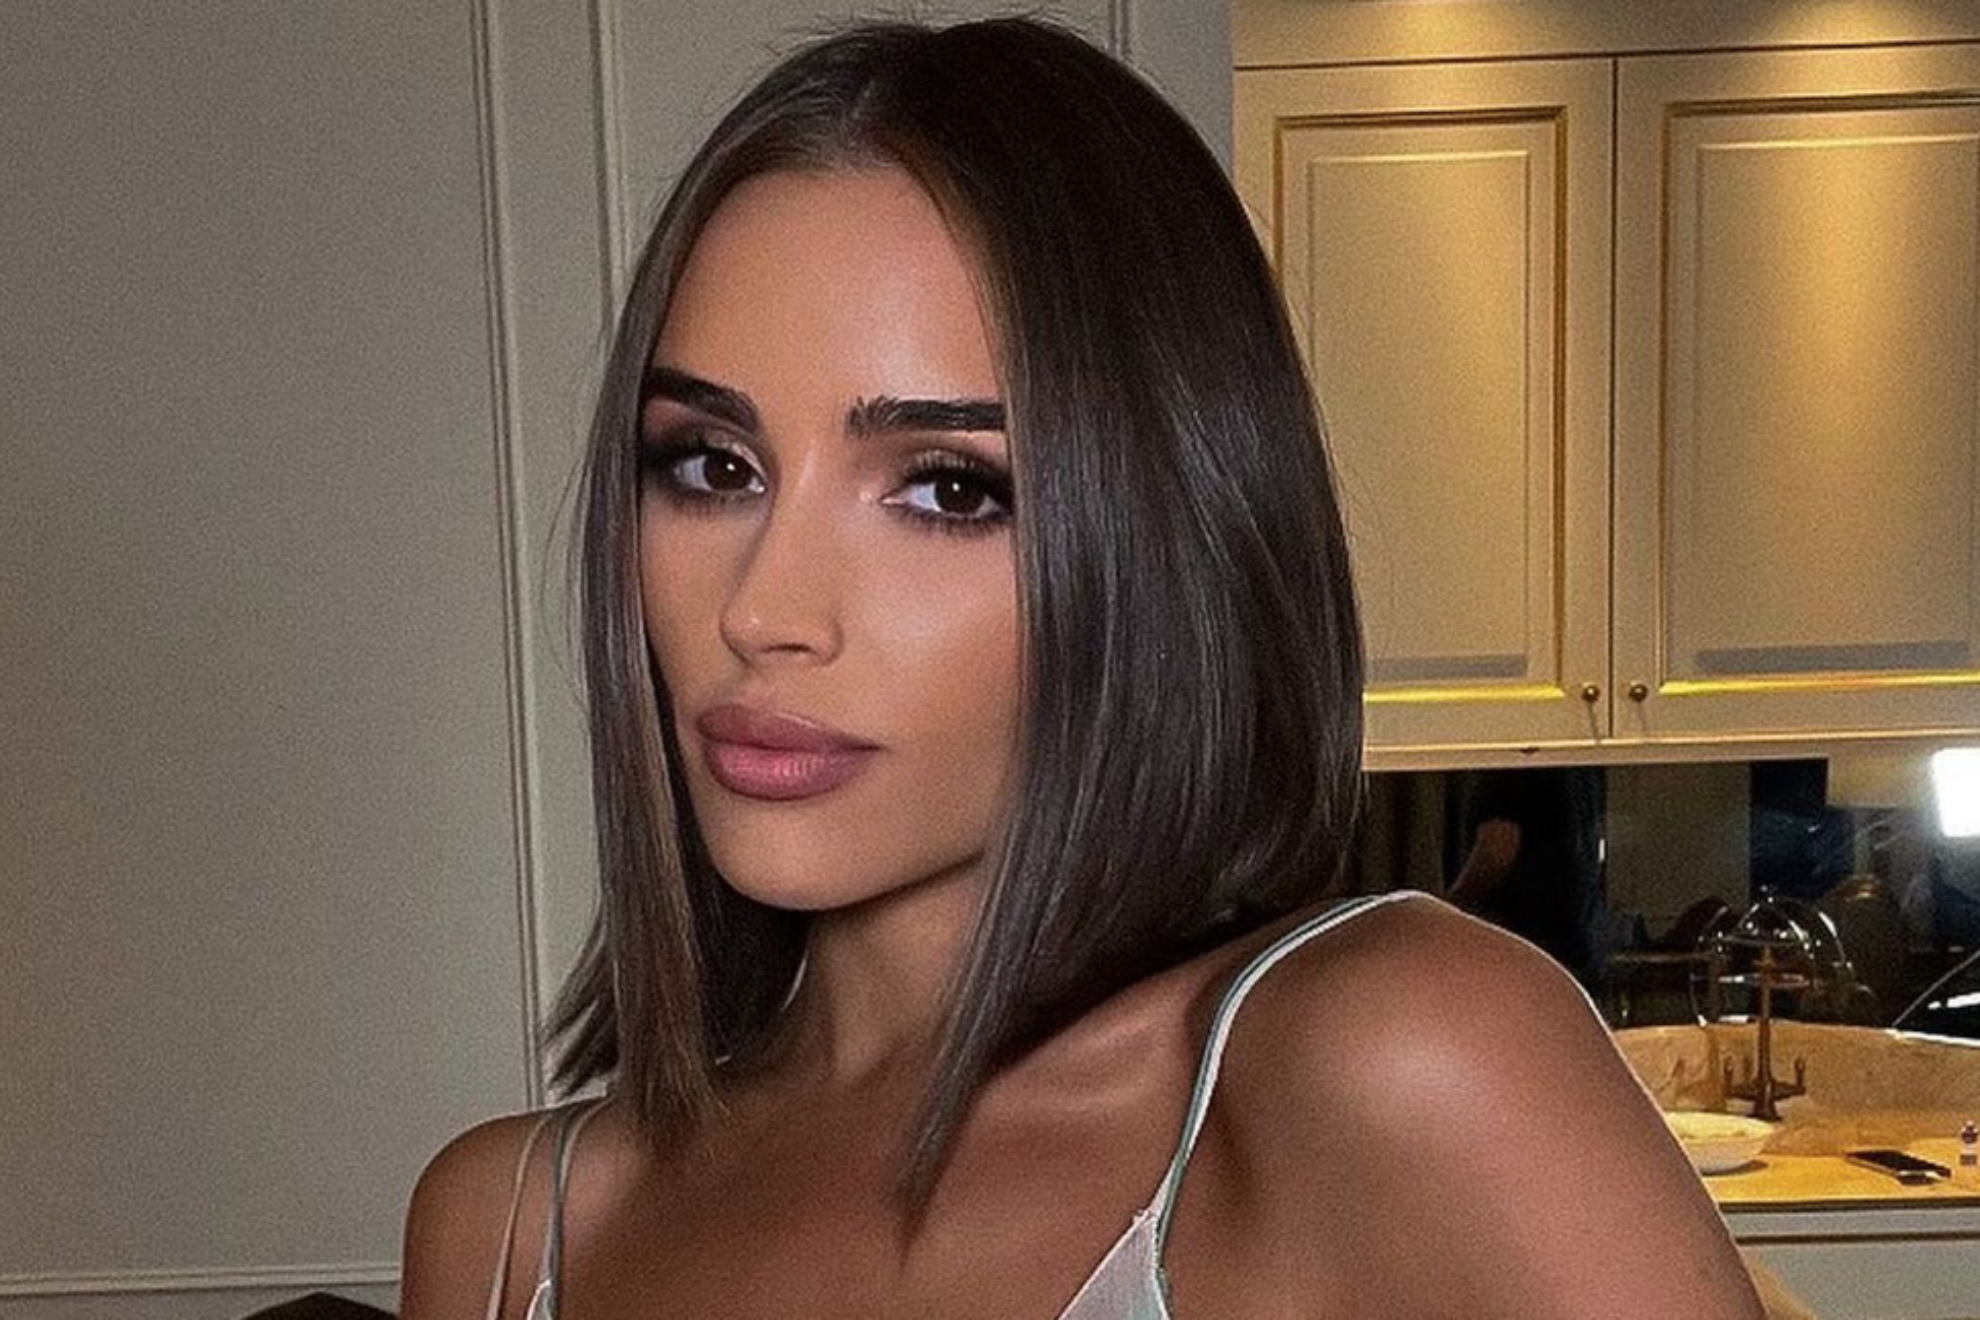 Olivia Culpo explains trick to avoid hangovers and reveals who chooses the photos she uploads to social media